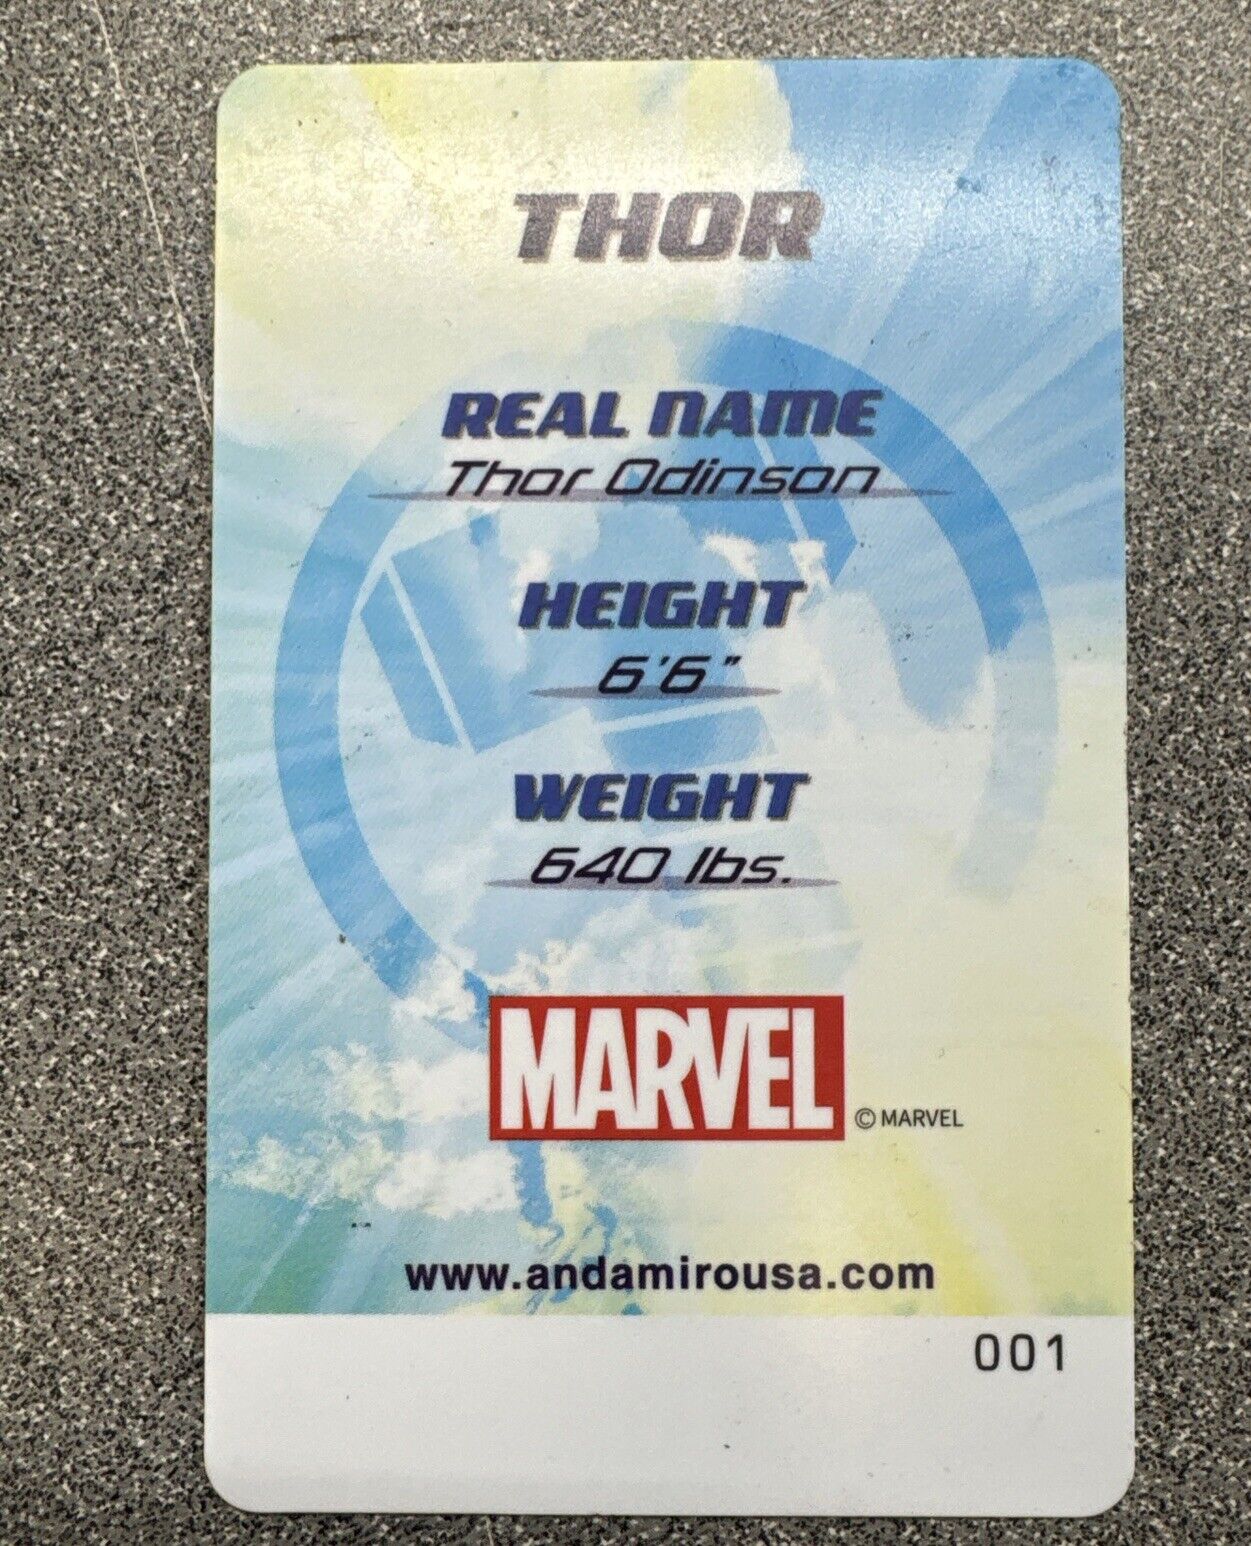 Marvel avengers Arcade Coin Pusher Trading Card THOR #001 NEW  USA